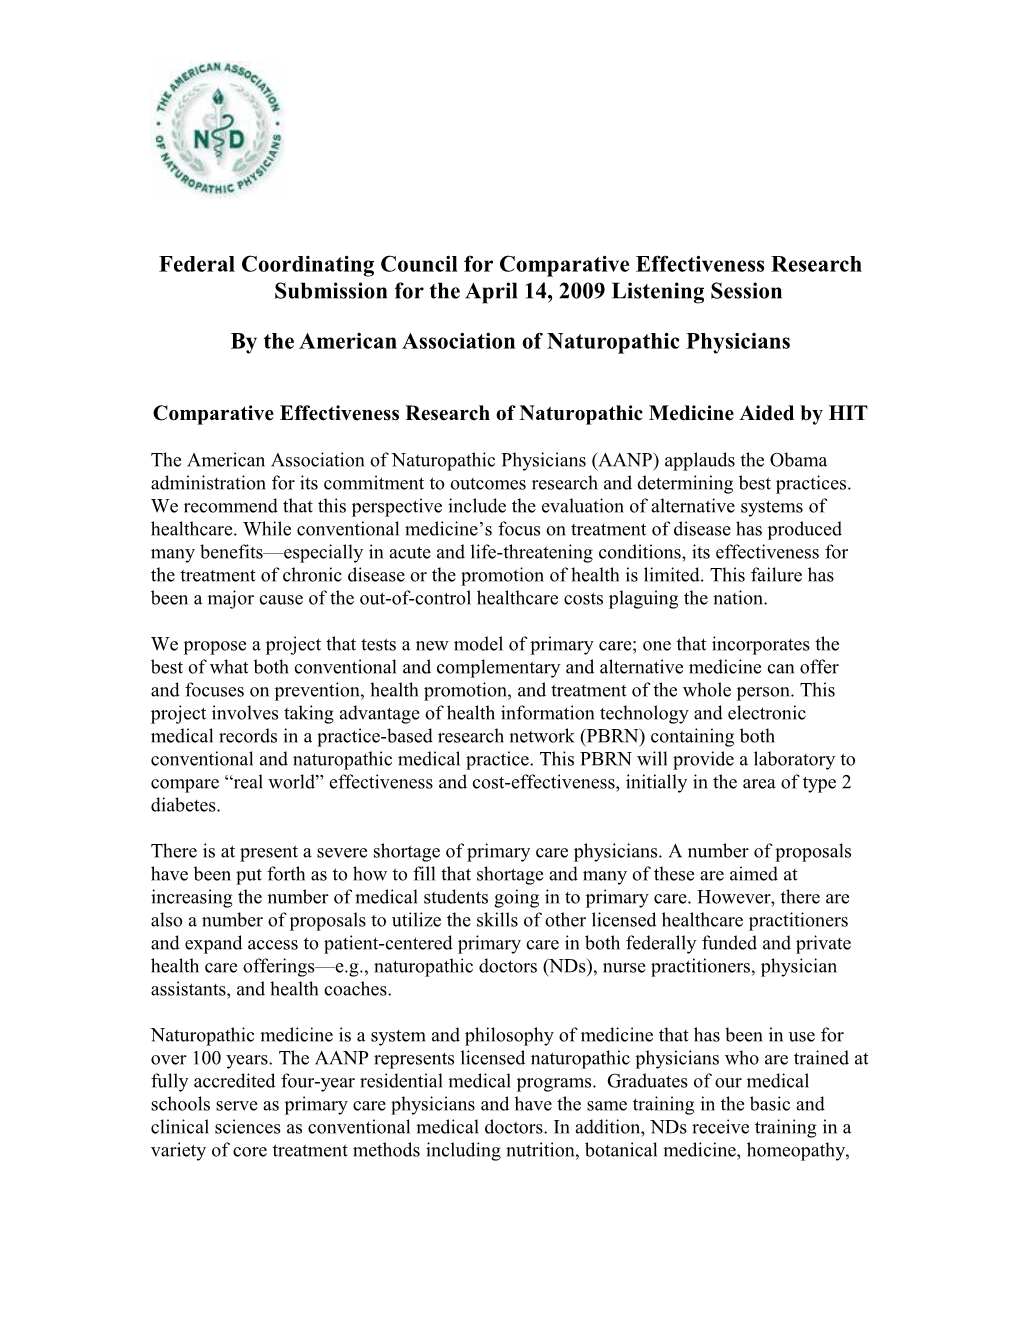 Submission to the Federal Coordinating Council for Comparative Effectiveness Research For